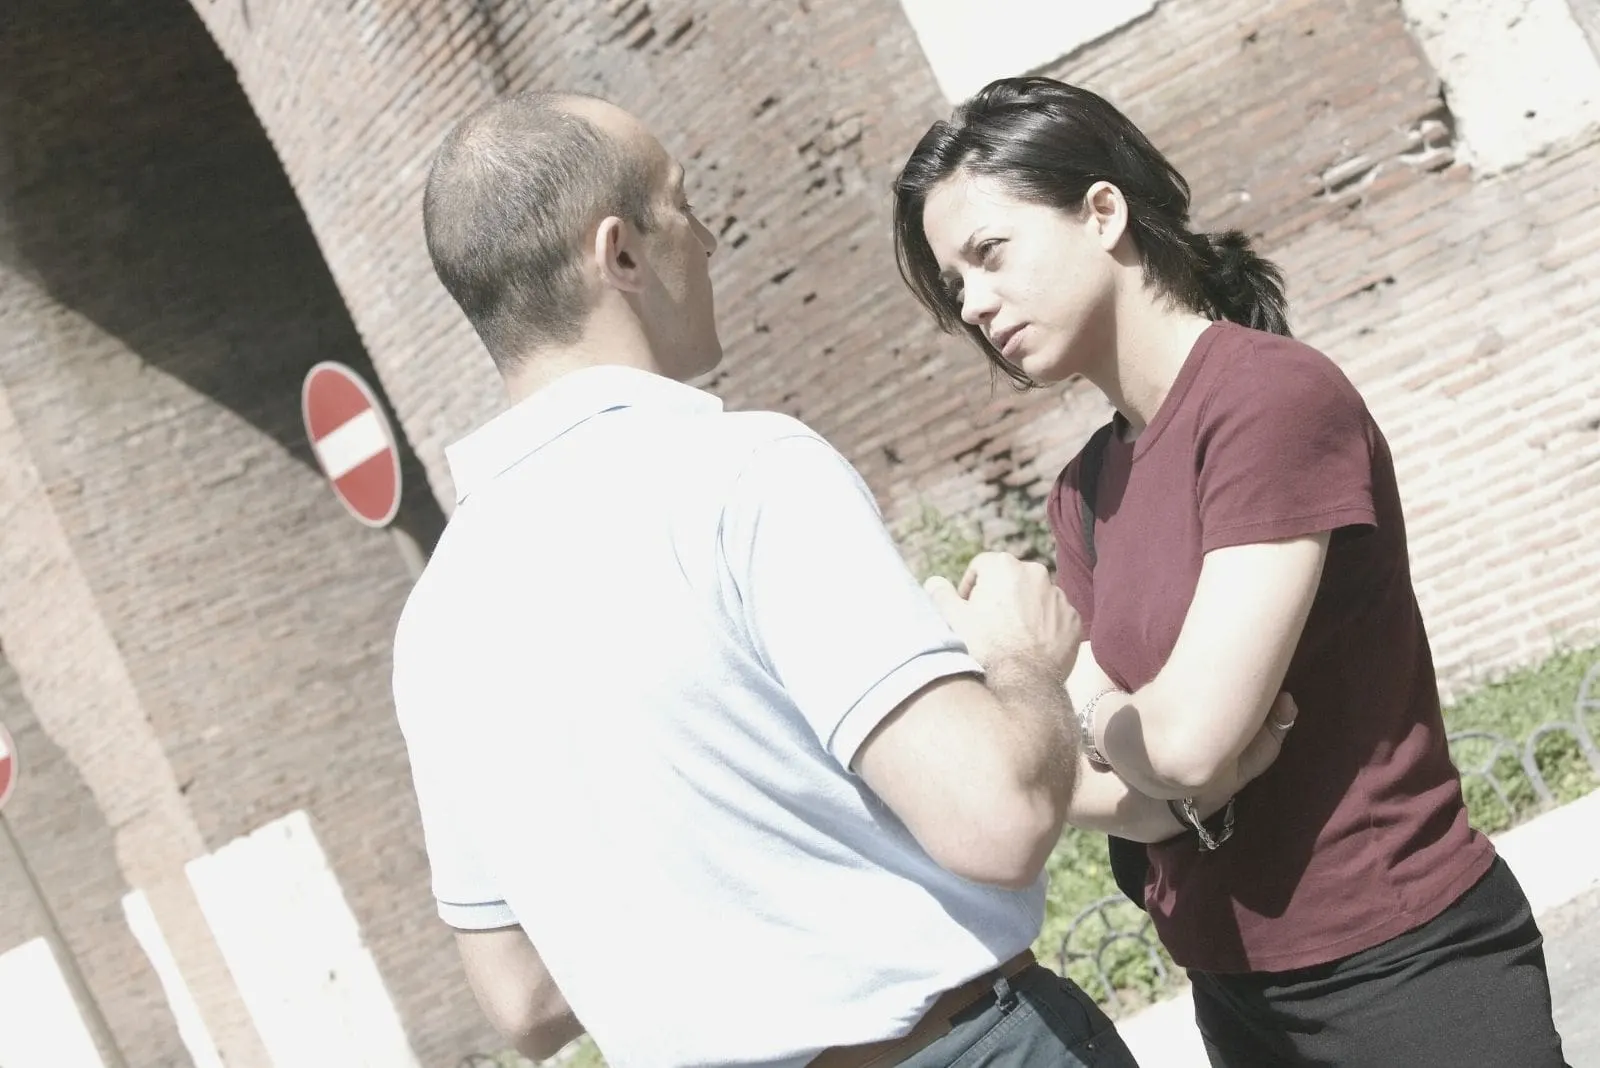 couple arguing outdoors standing near a brick wall building